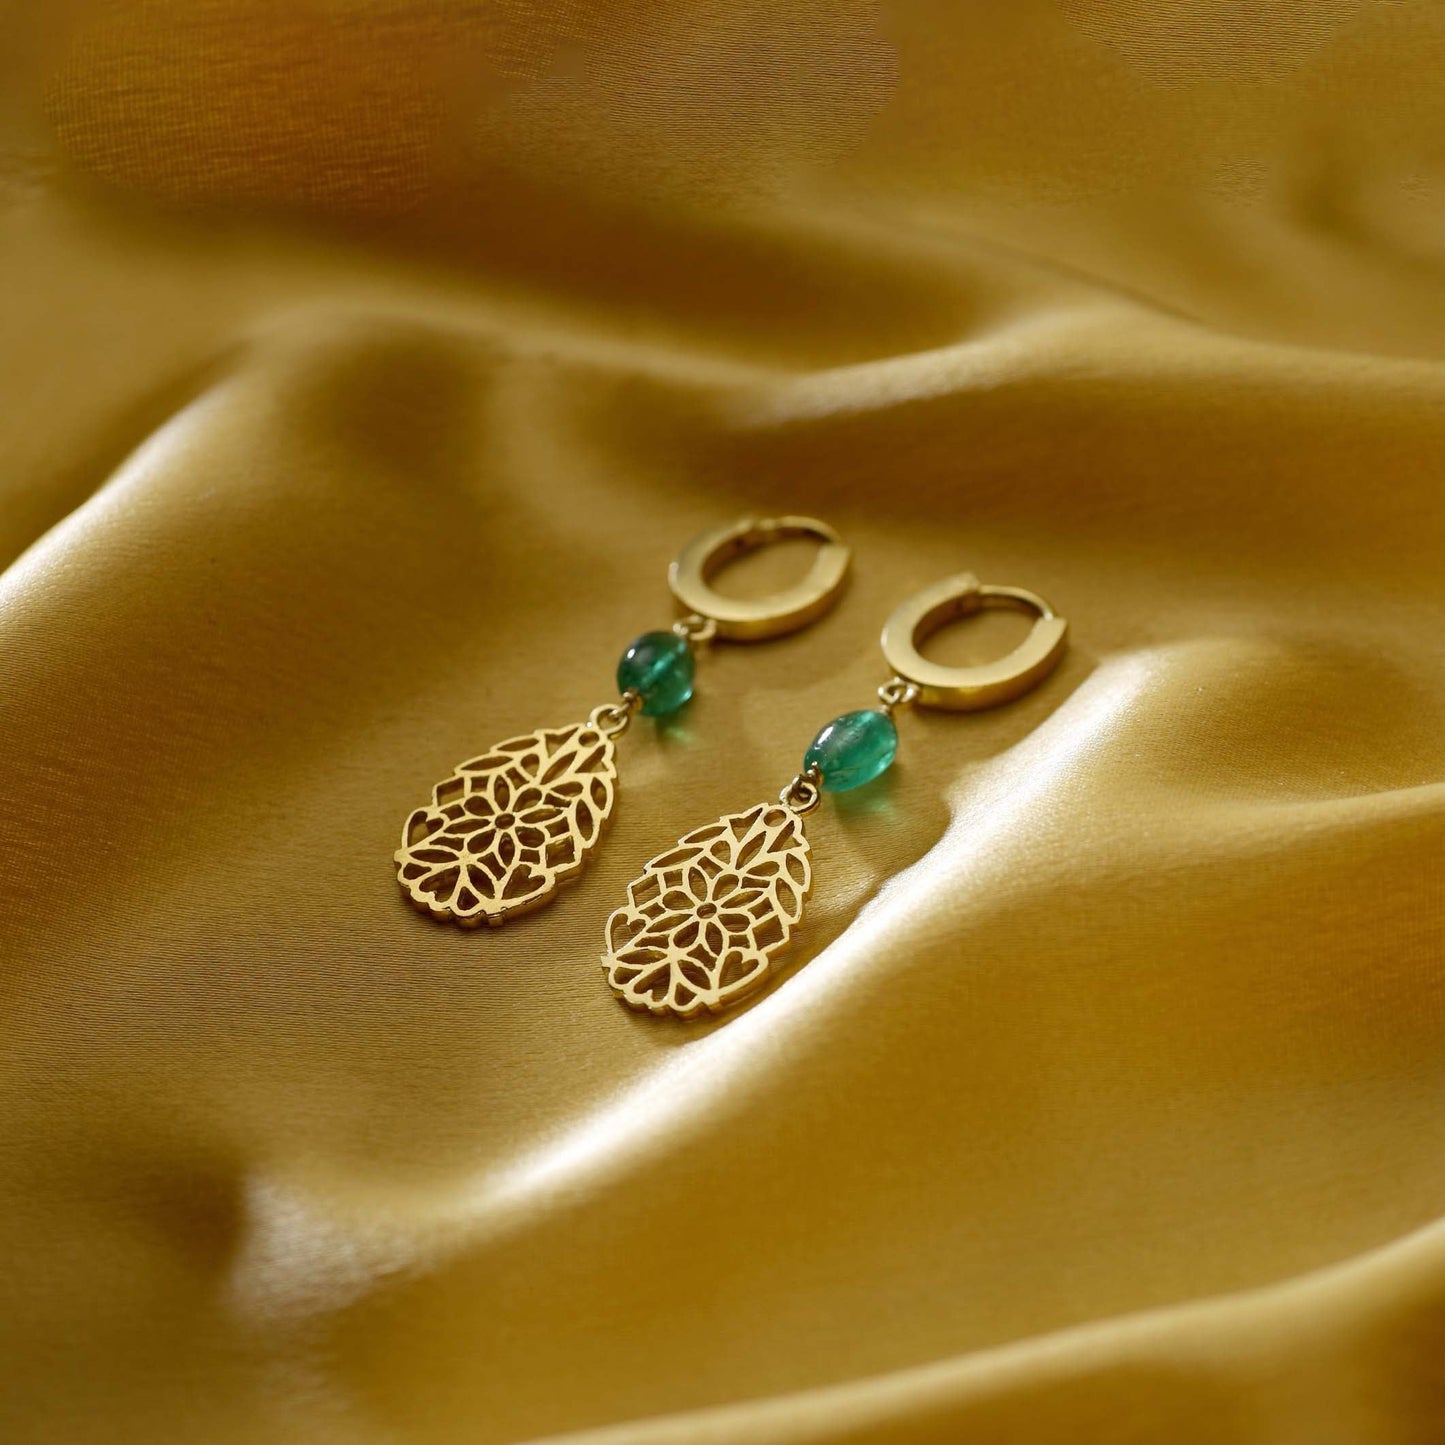 The Malavi Lace Series Gold and Emerald Long Earrings by Rasvihar